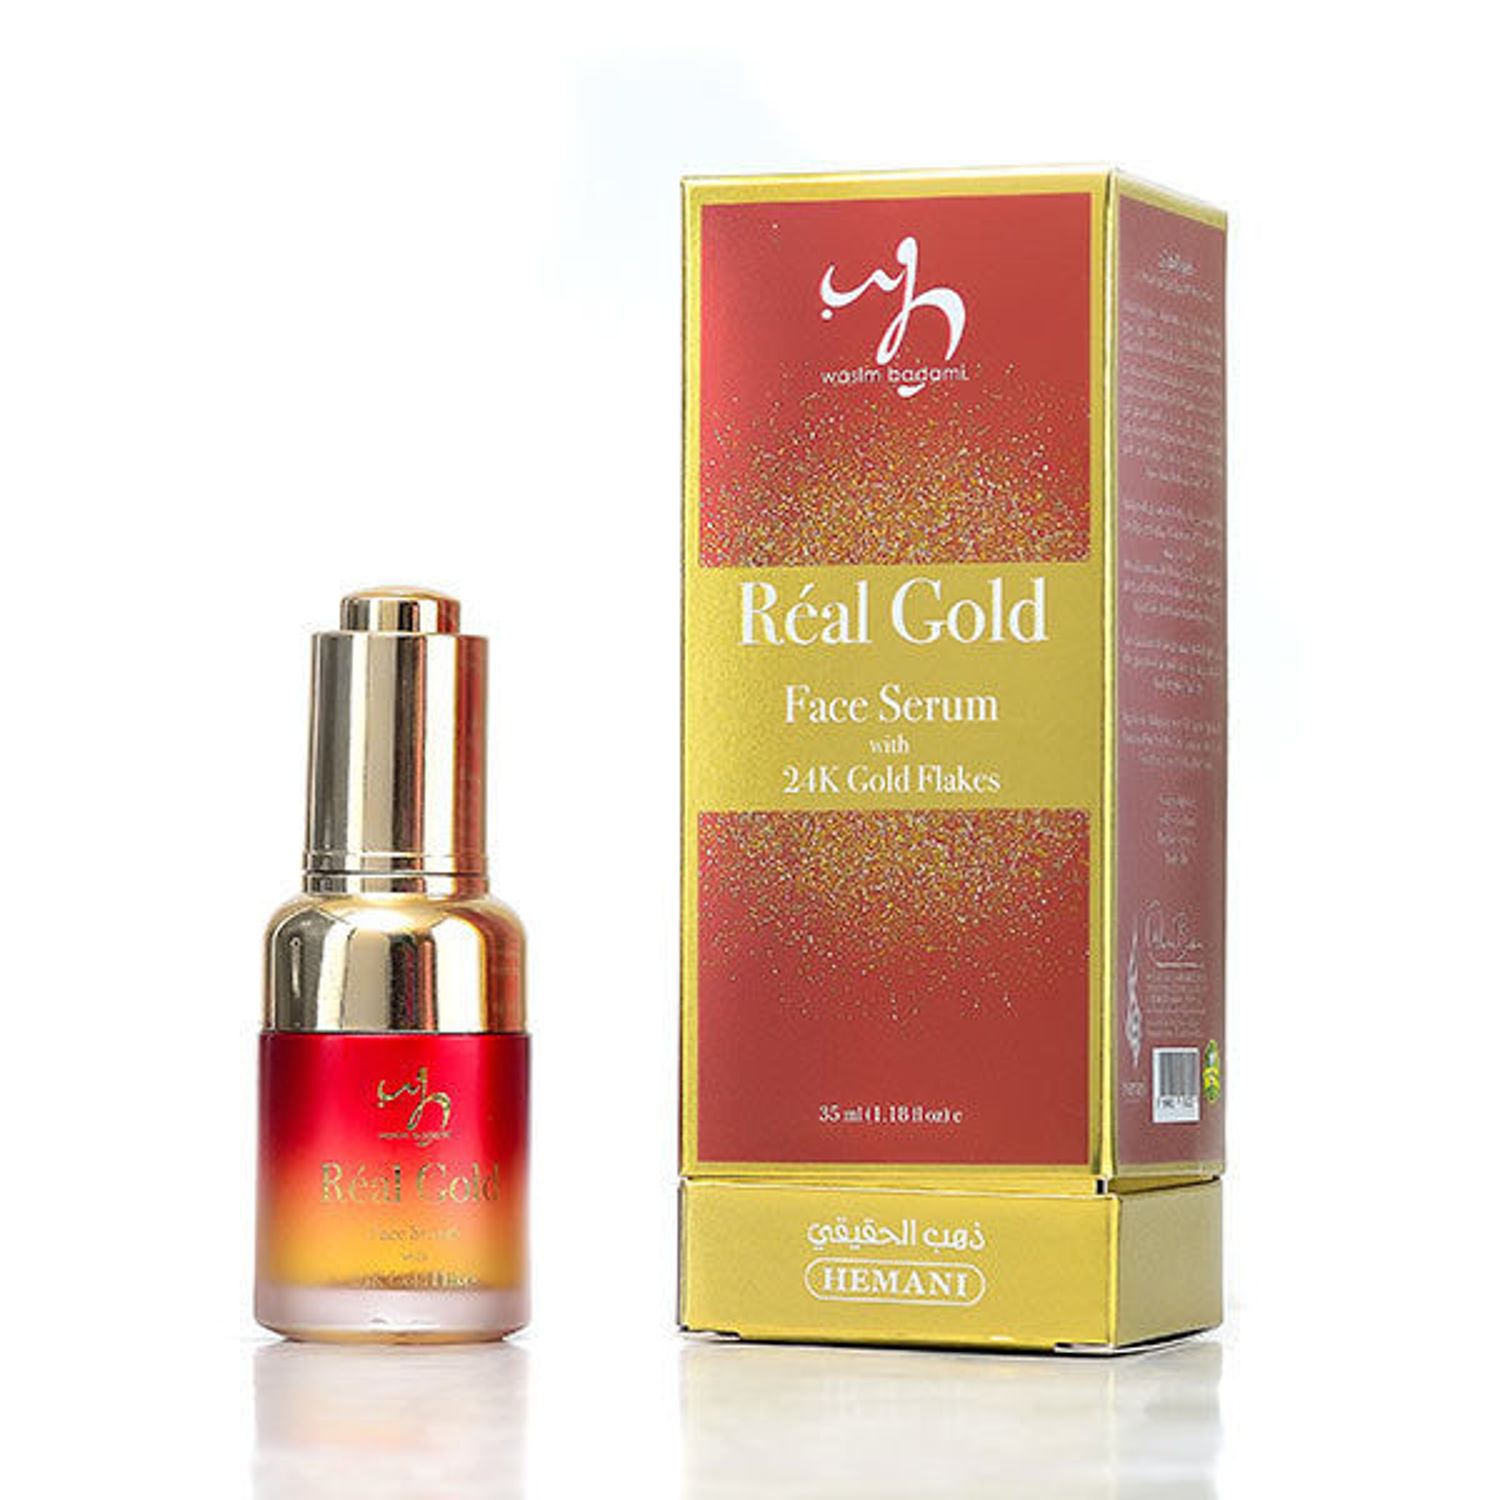 Real Gold Face Serum